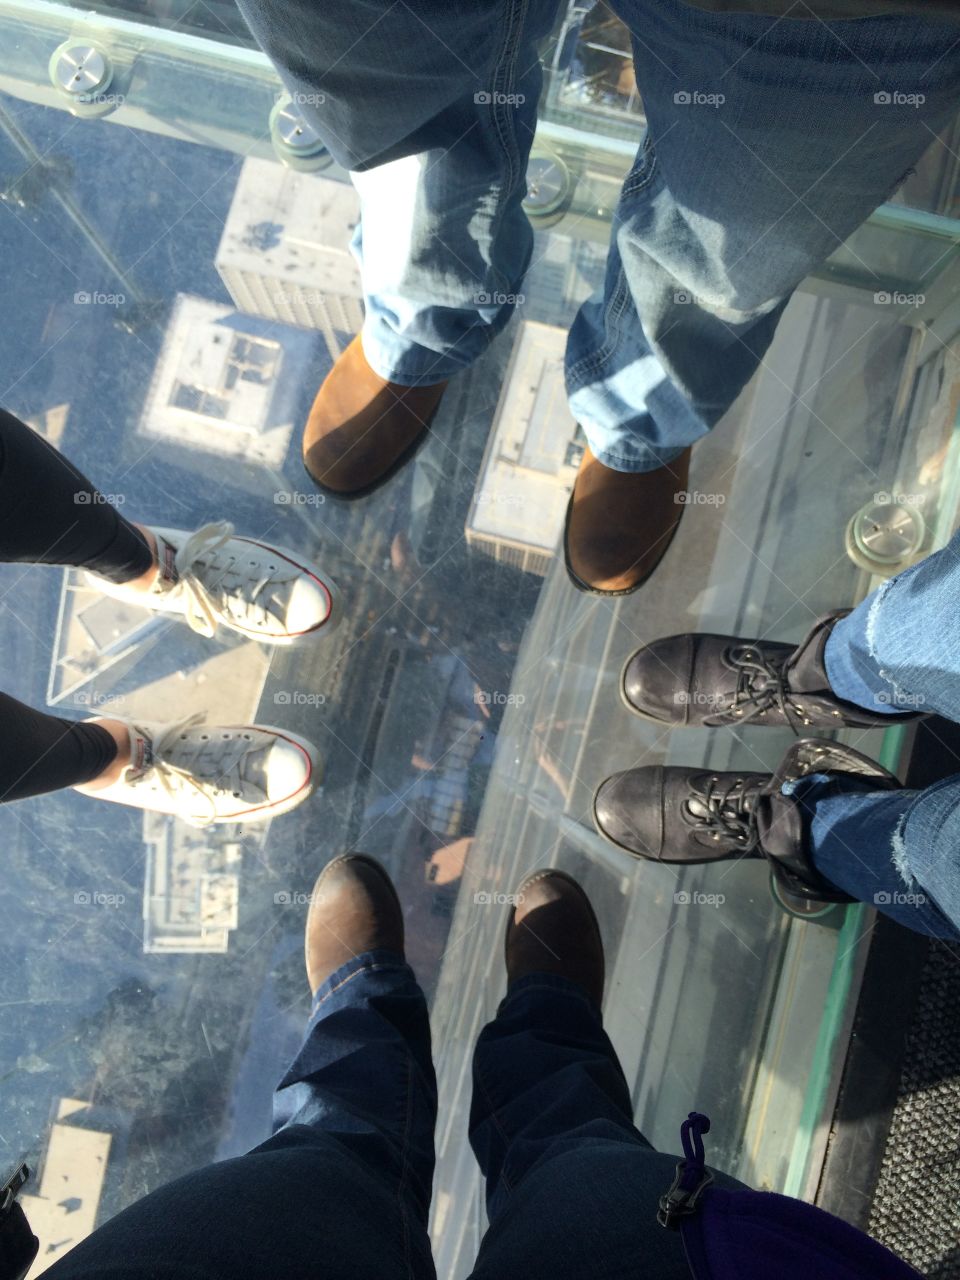 Don't look down